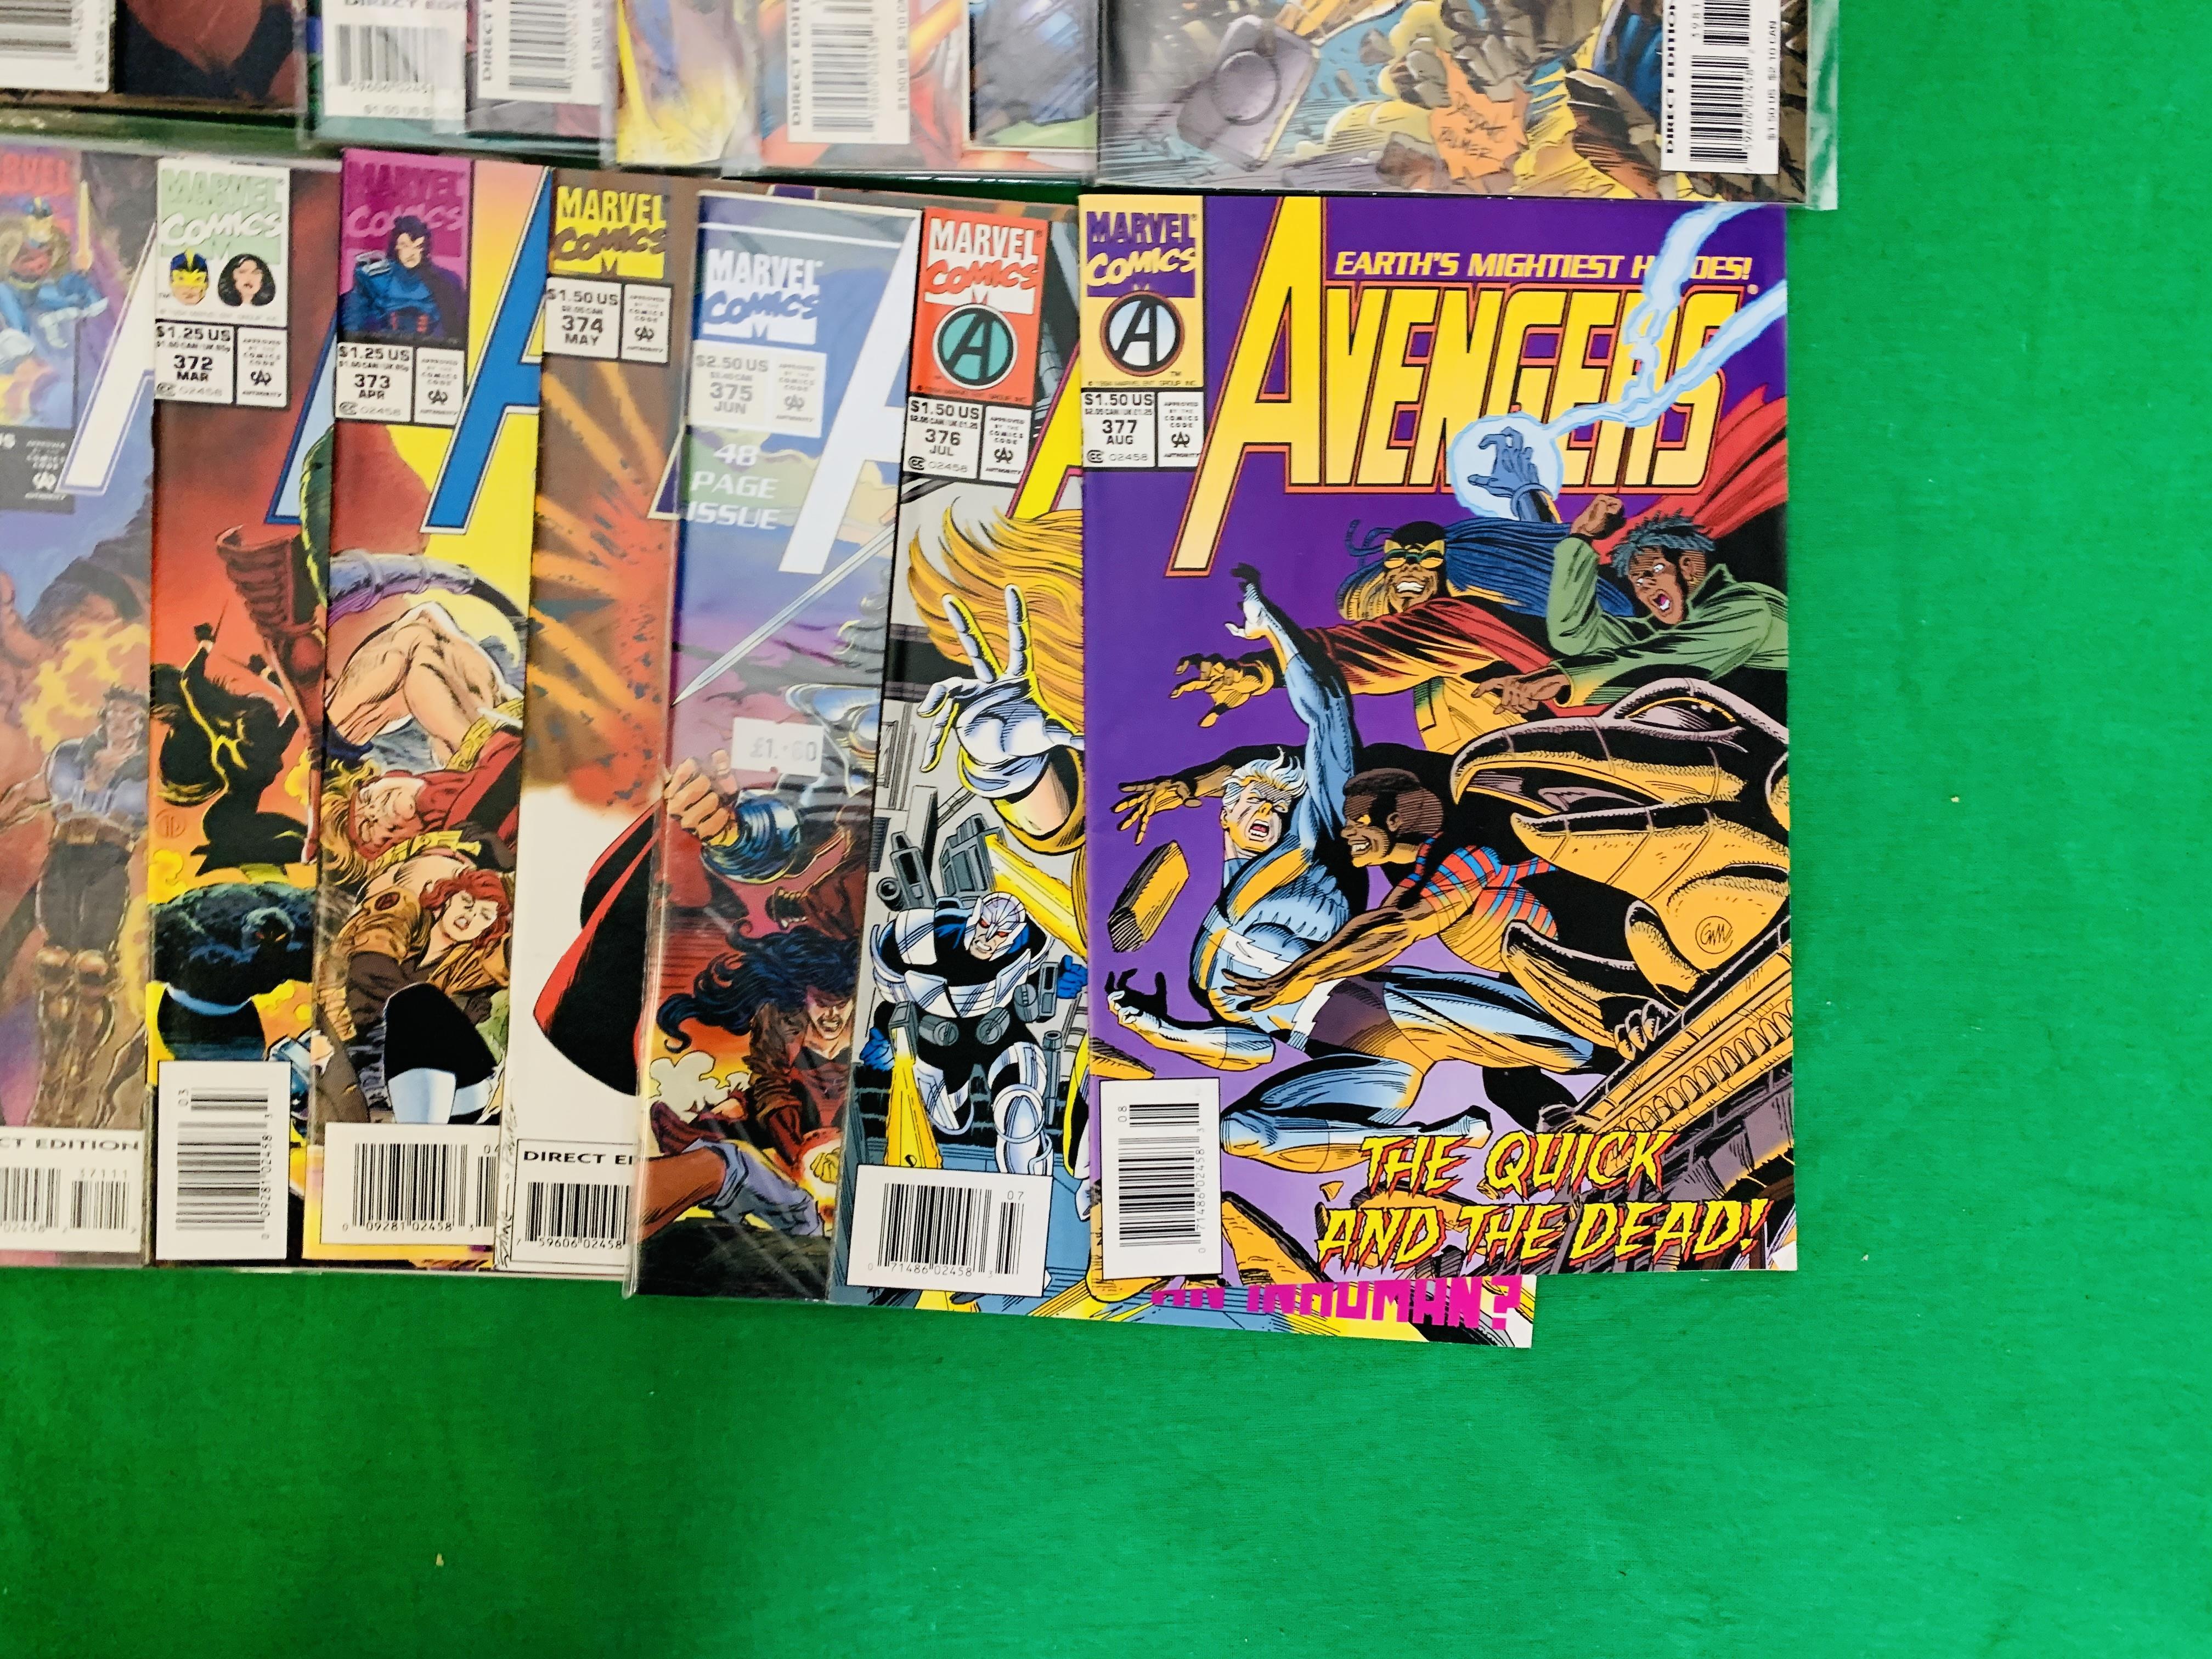 MARVEL COMICS THE AVENGERS NO. 300 - 402, MISSING ISSUES 325, 329 AND 334. - Image 13 of 16